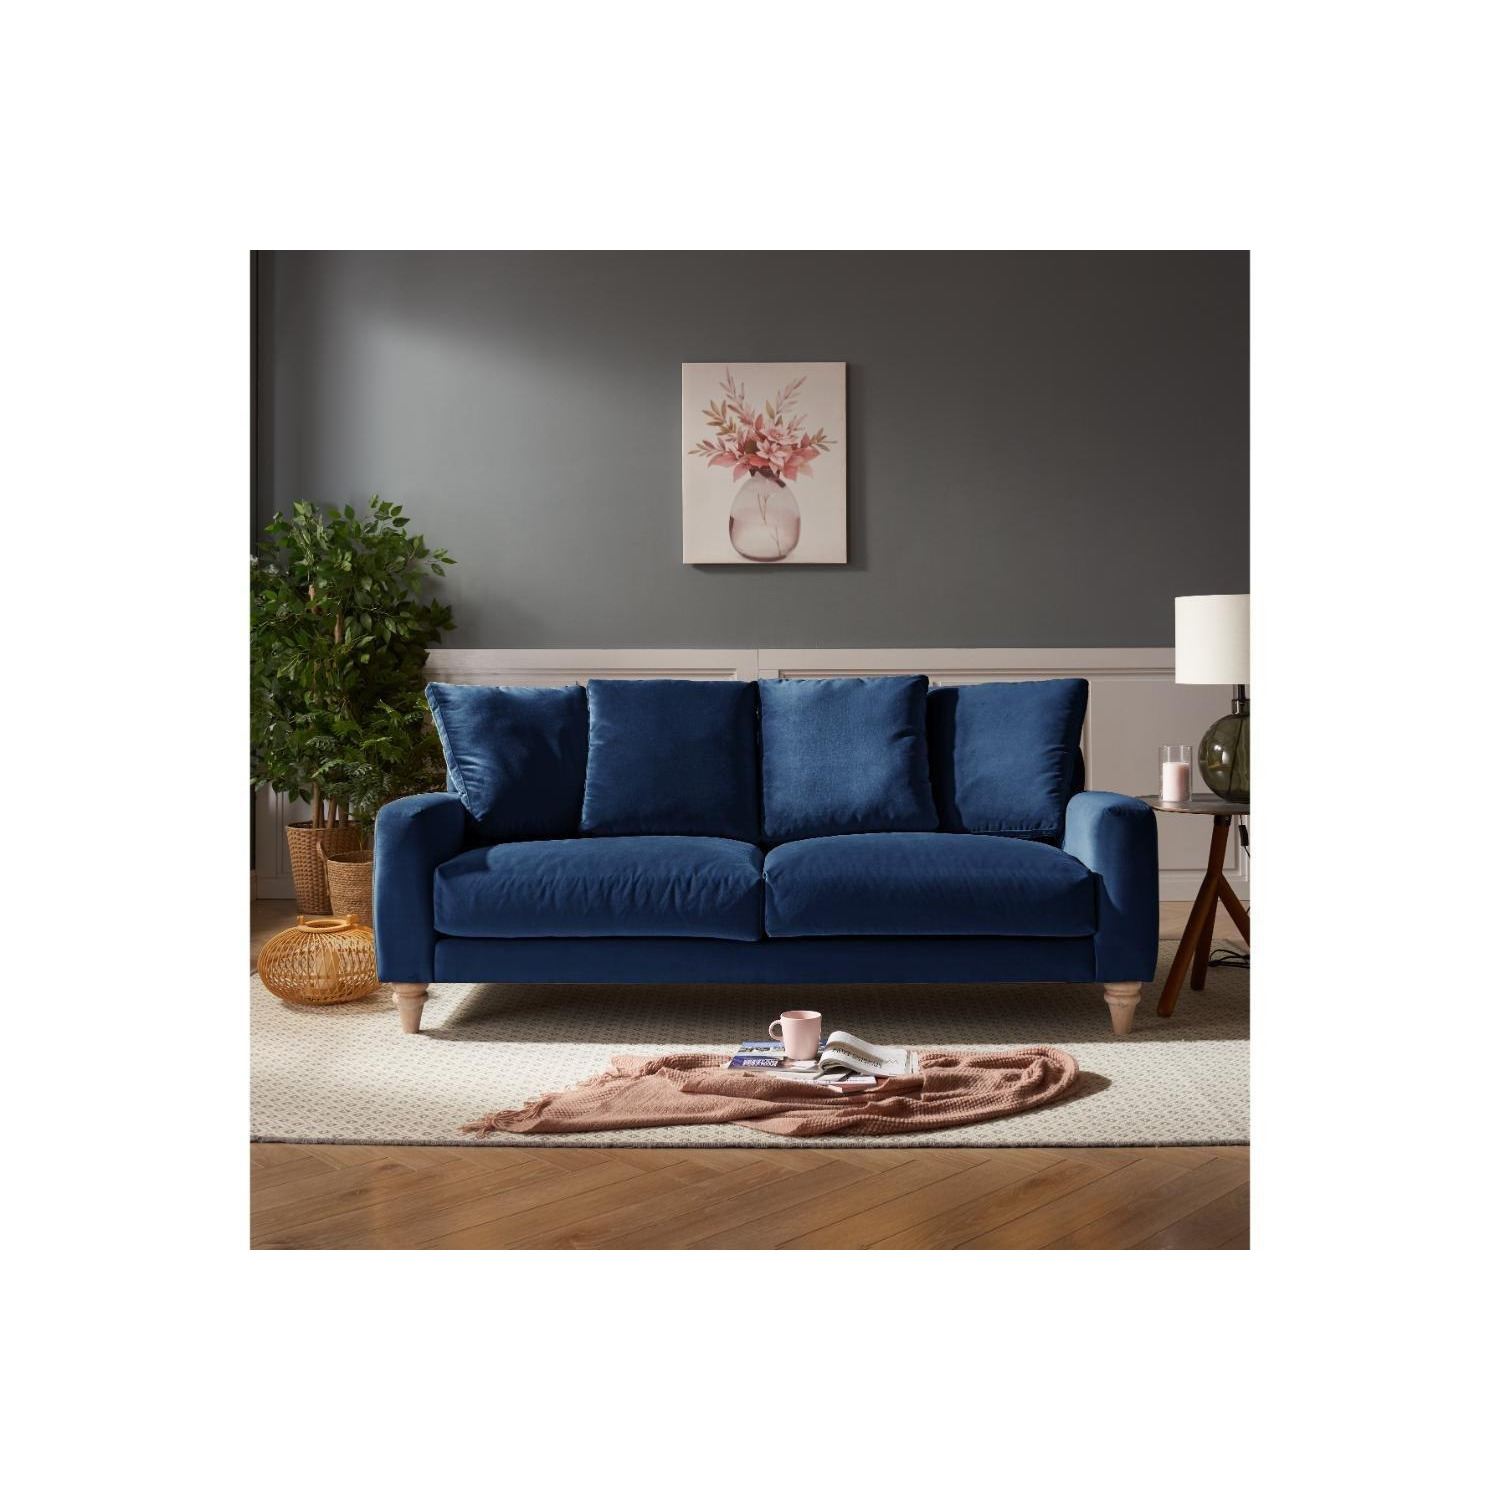 Covent 3 Seater Sofa With Scatter Back Cushions - image 1